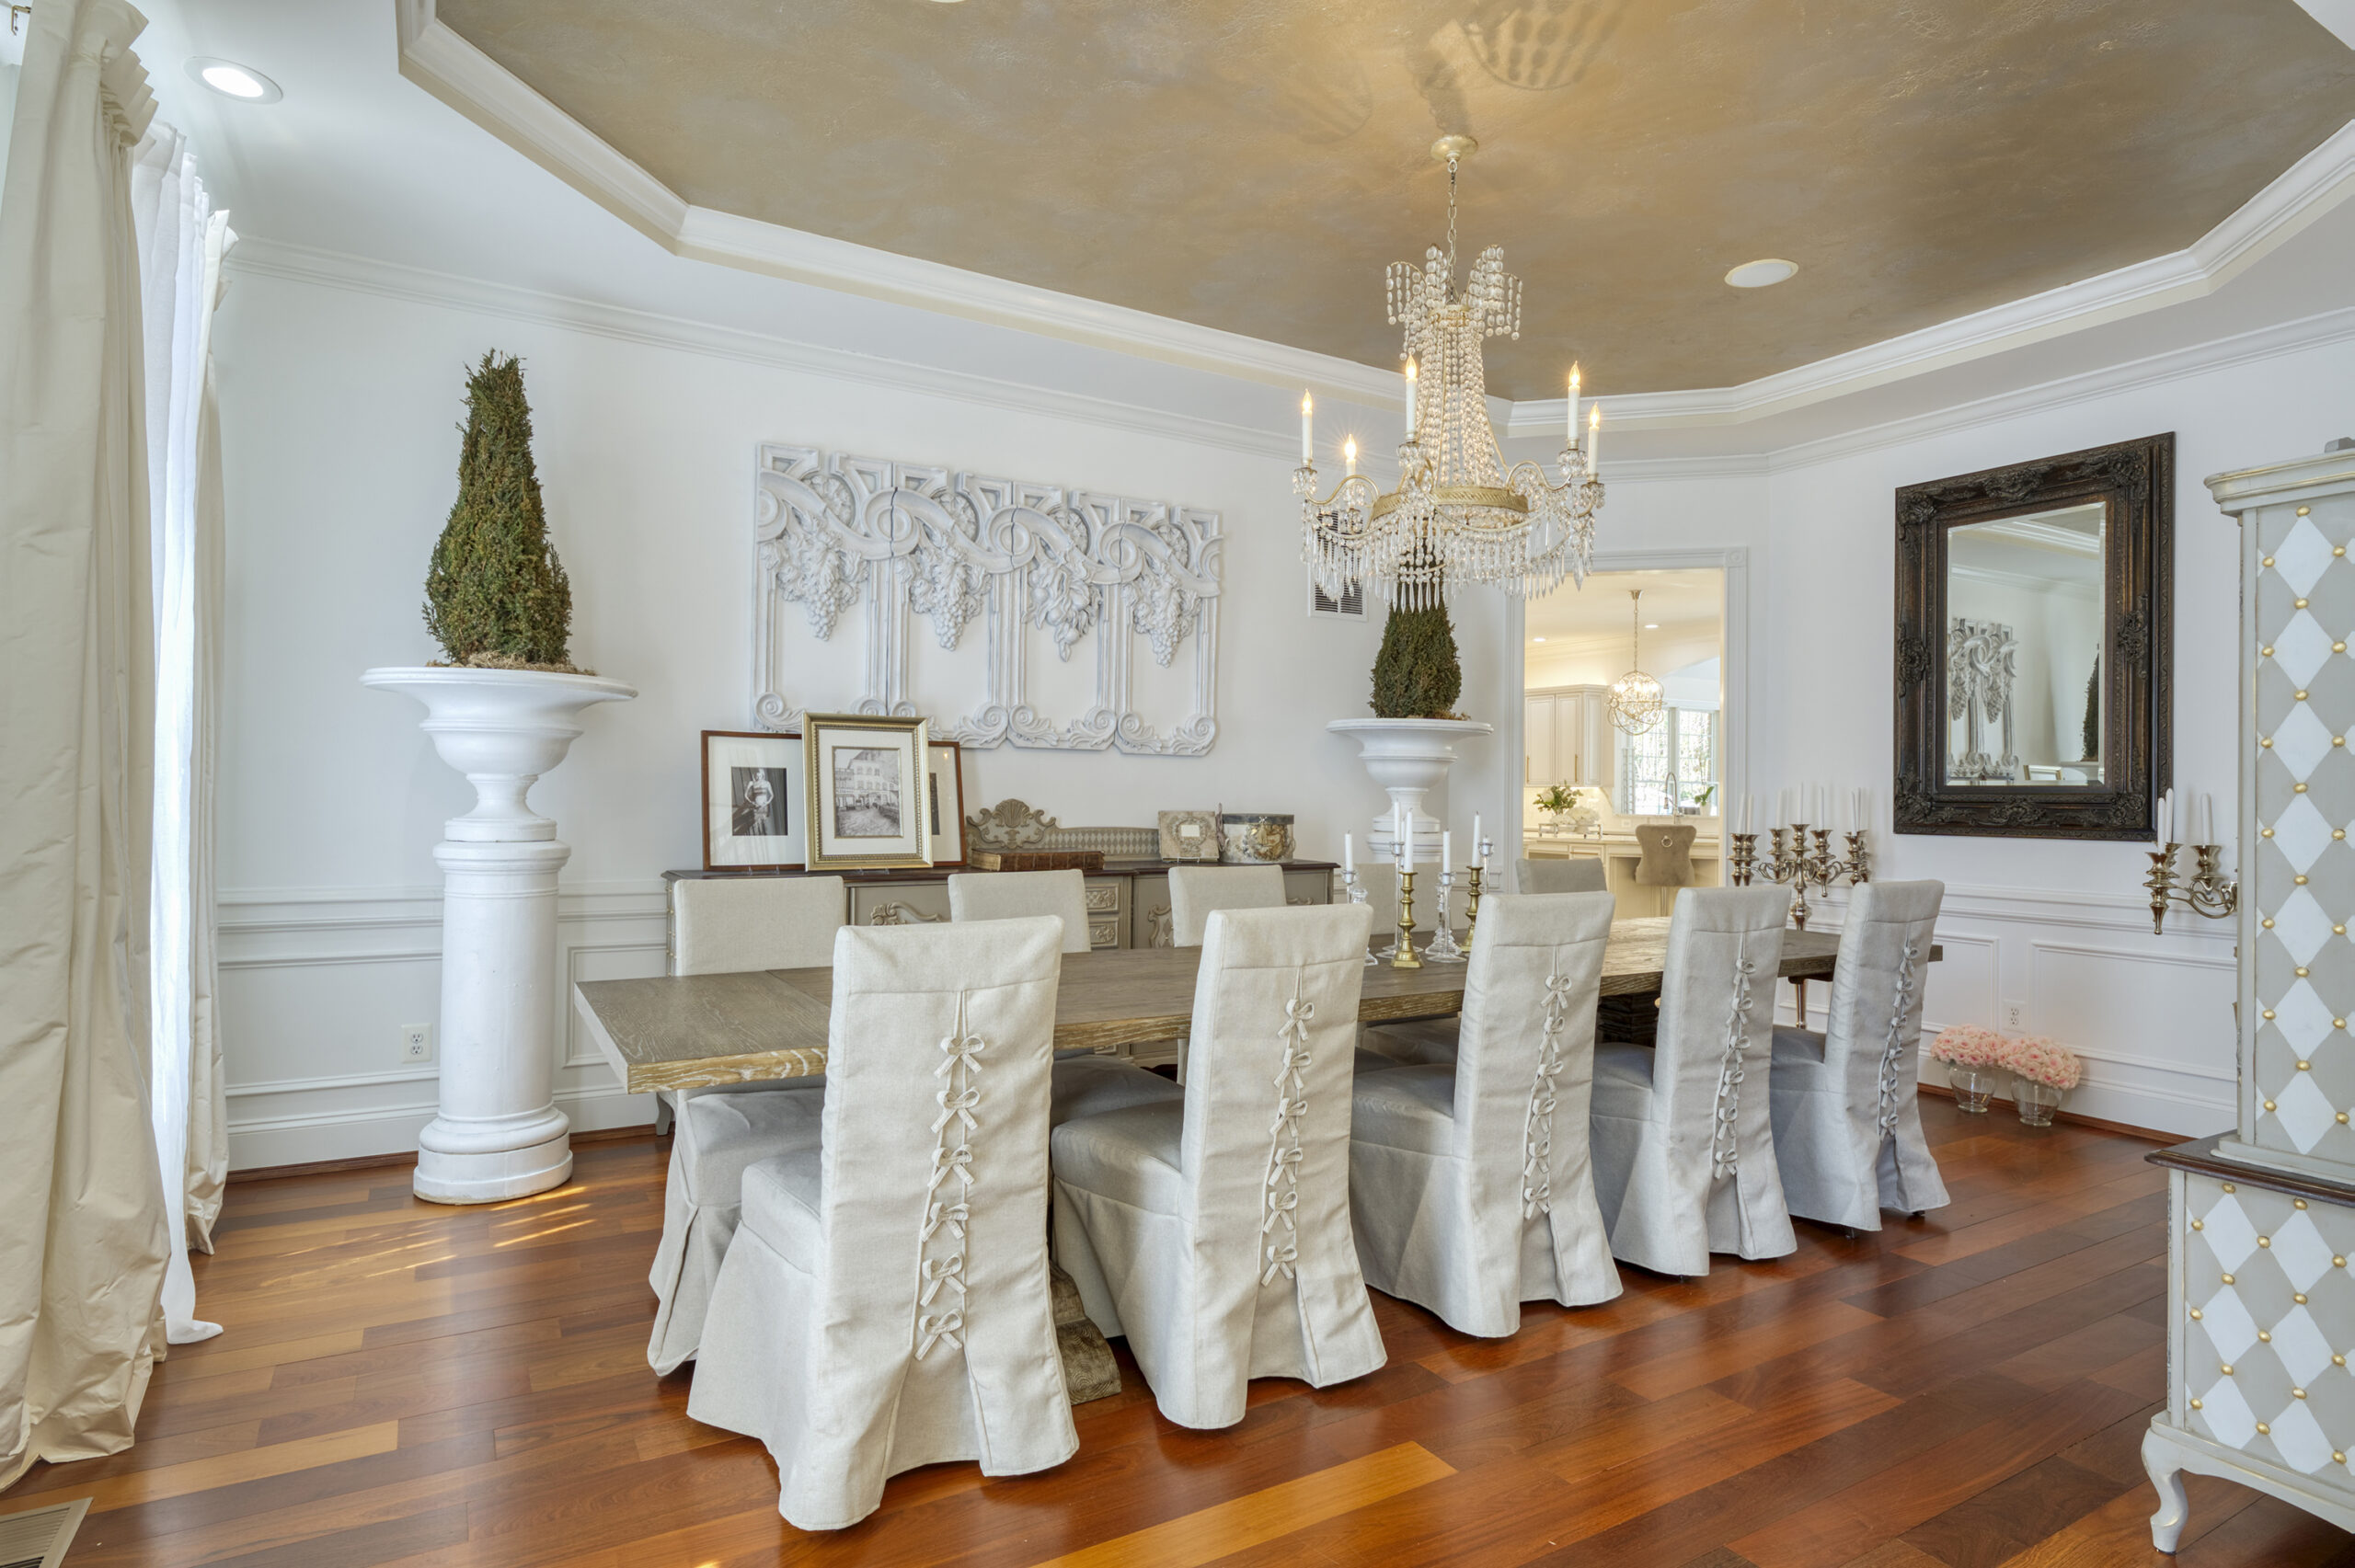 Professional interior photo shot by Sky Blue Media using Fusion Photography in 2023 showing true, crisp, vibrant colors in the formal dining room 